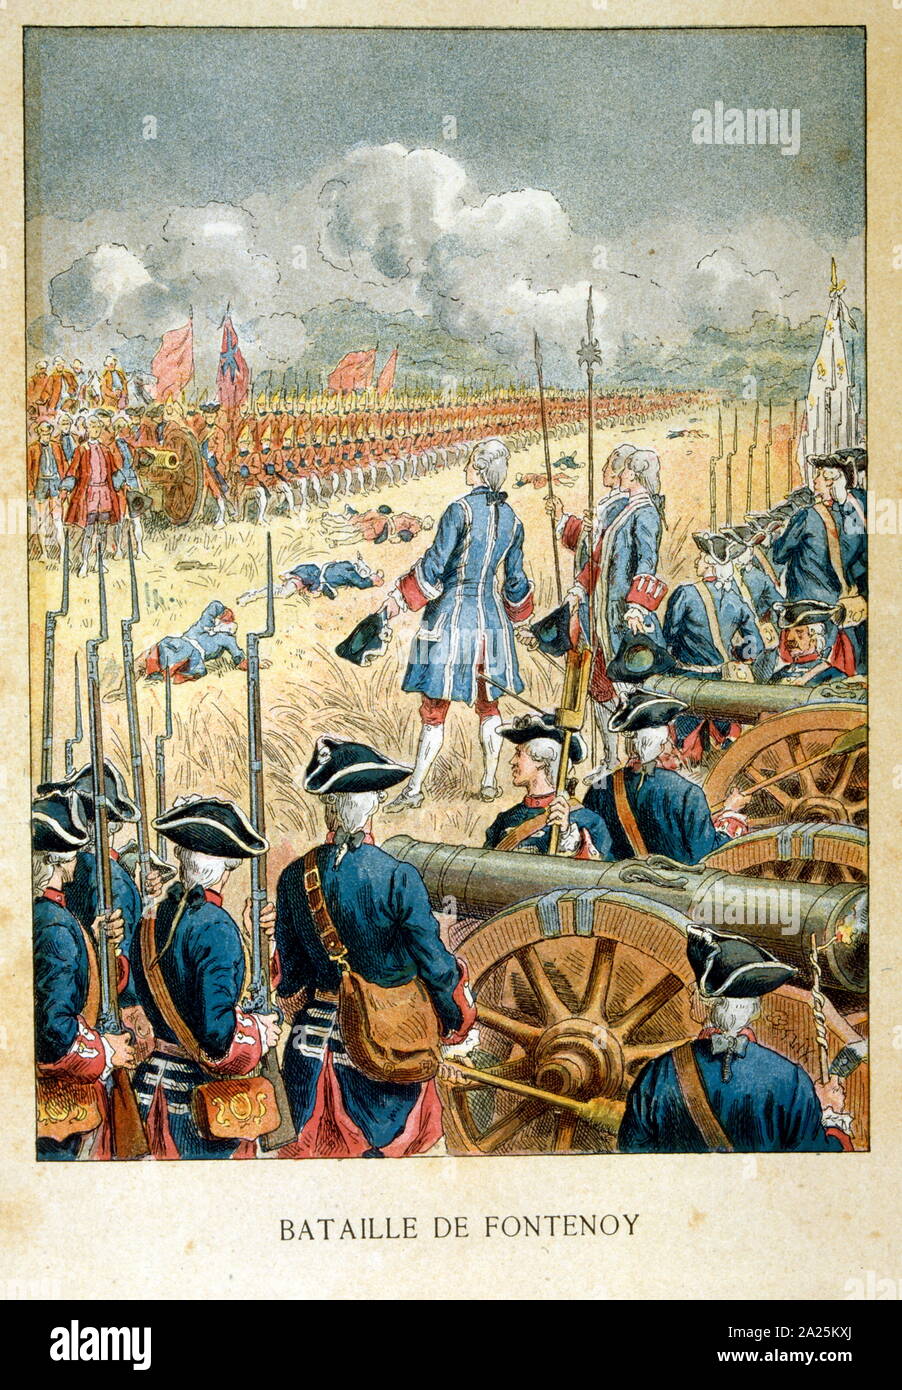 The Battle of Fontenoy, 11 May 1745, was a major engagement of the War of the Austrian Succession, fought between the forces of the Pragmatic Allies – comprising mainly Dutch, British, and Hanoverian troops under the command of the Duke of Cumberland – and a French army under Maurice de Saxe, commander of King Louis XV's forces in the Low Countries. The battle was one of the most important in the war and considered the masterpiece of Saxe, serving France; Louis XV, and his son, the Dauphin, were present at the battle. Stock Photo